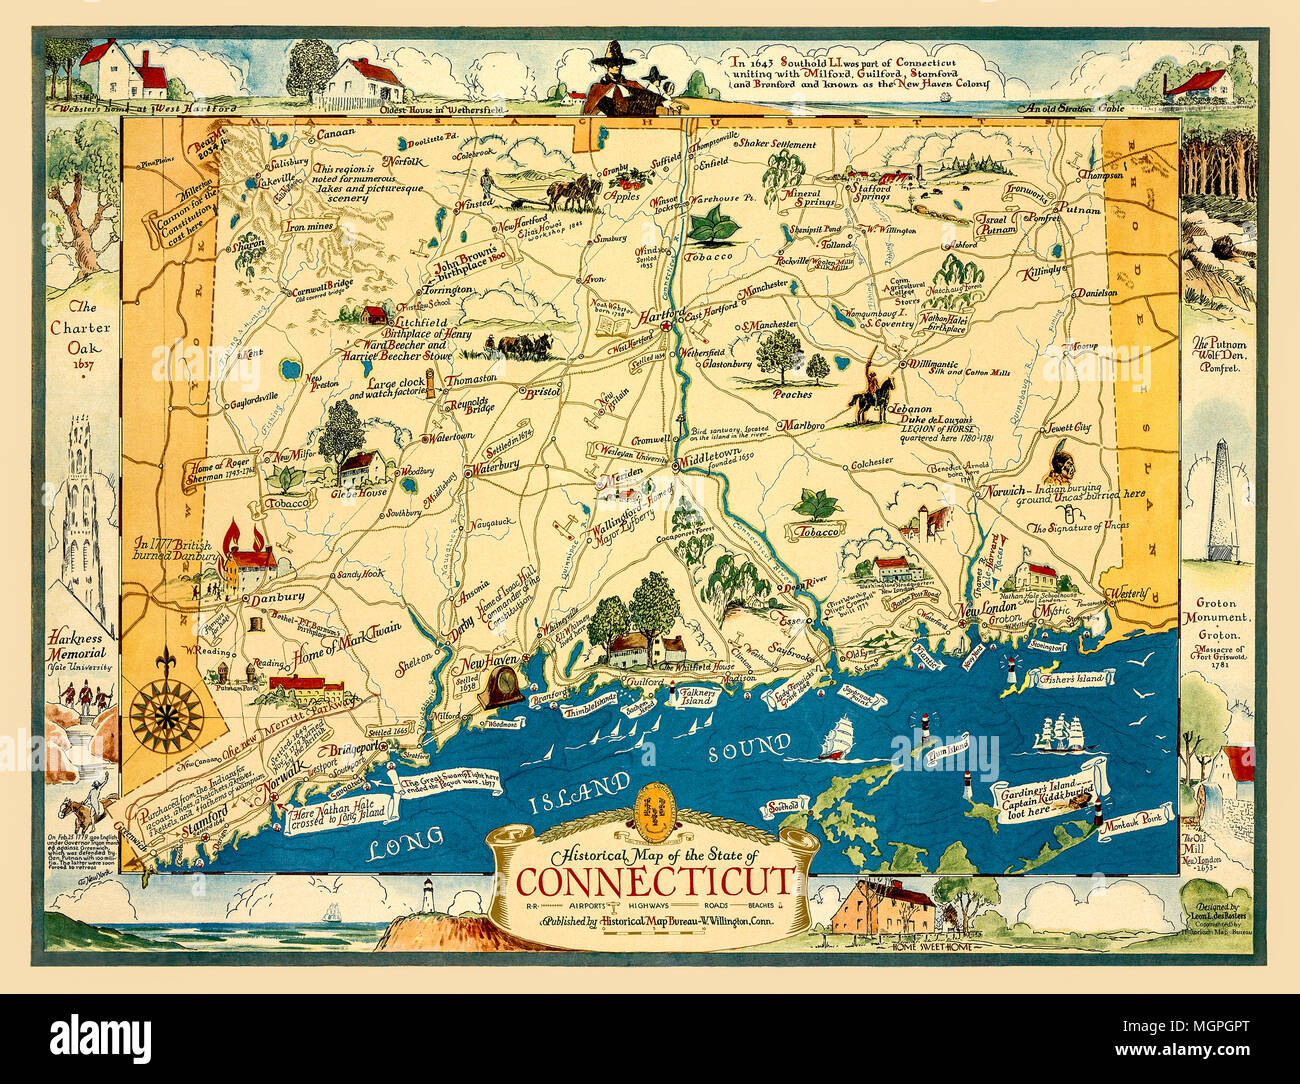 Connecticut 1930s Map With Historical Information Stock Photo